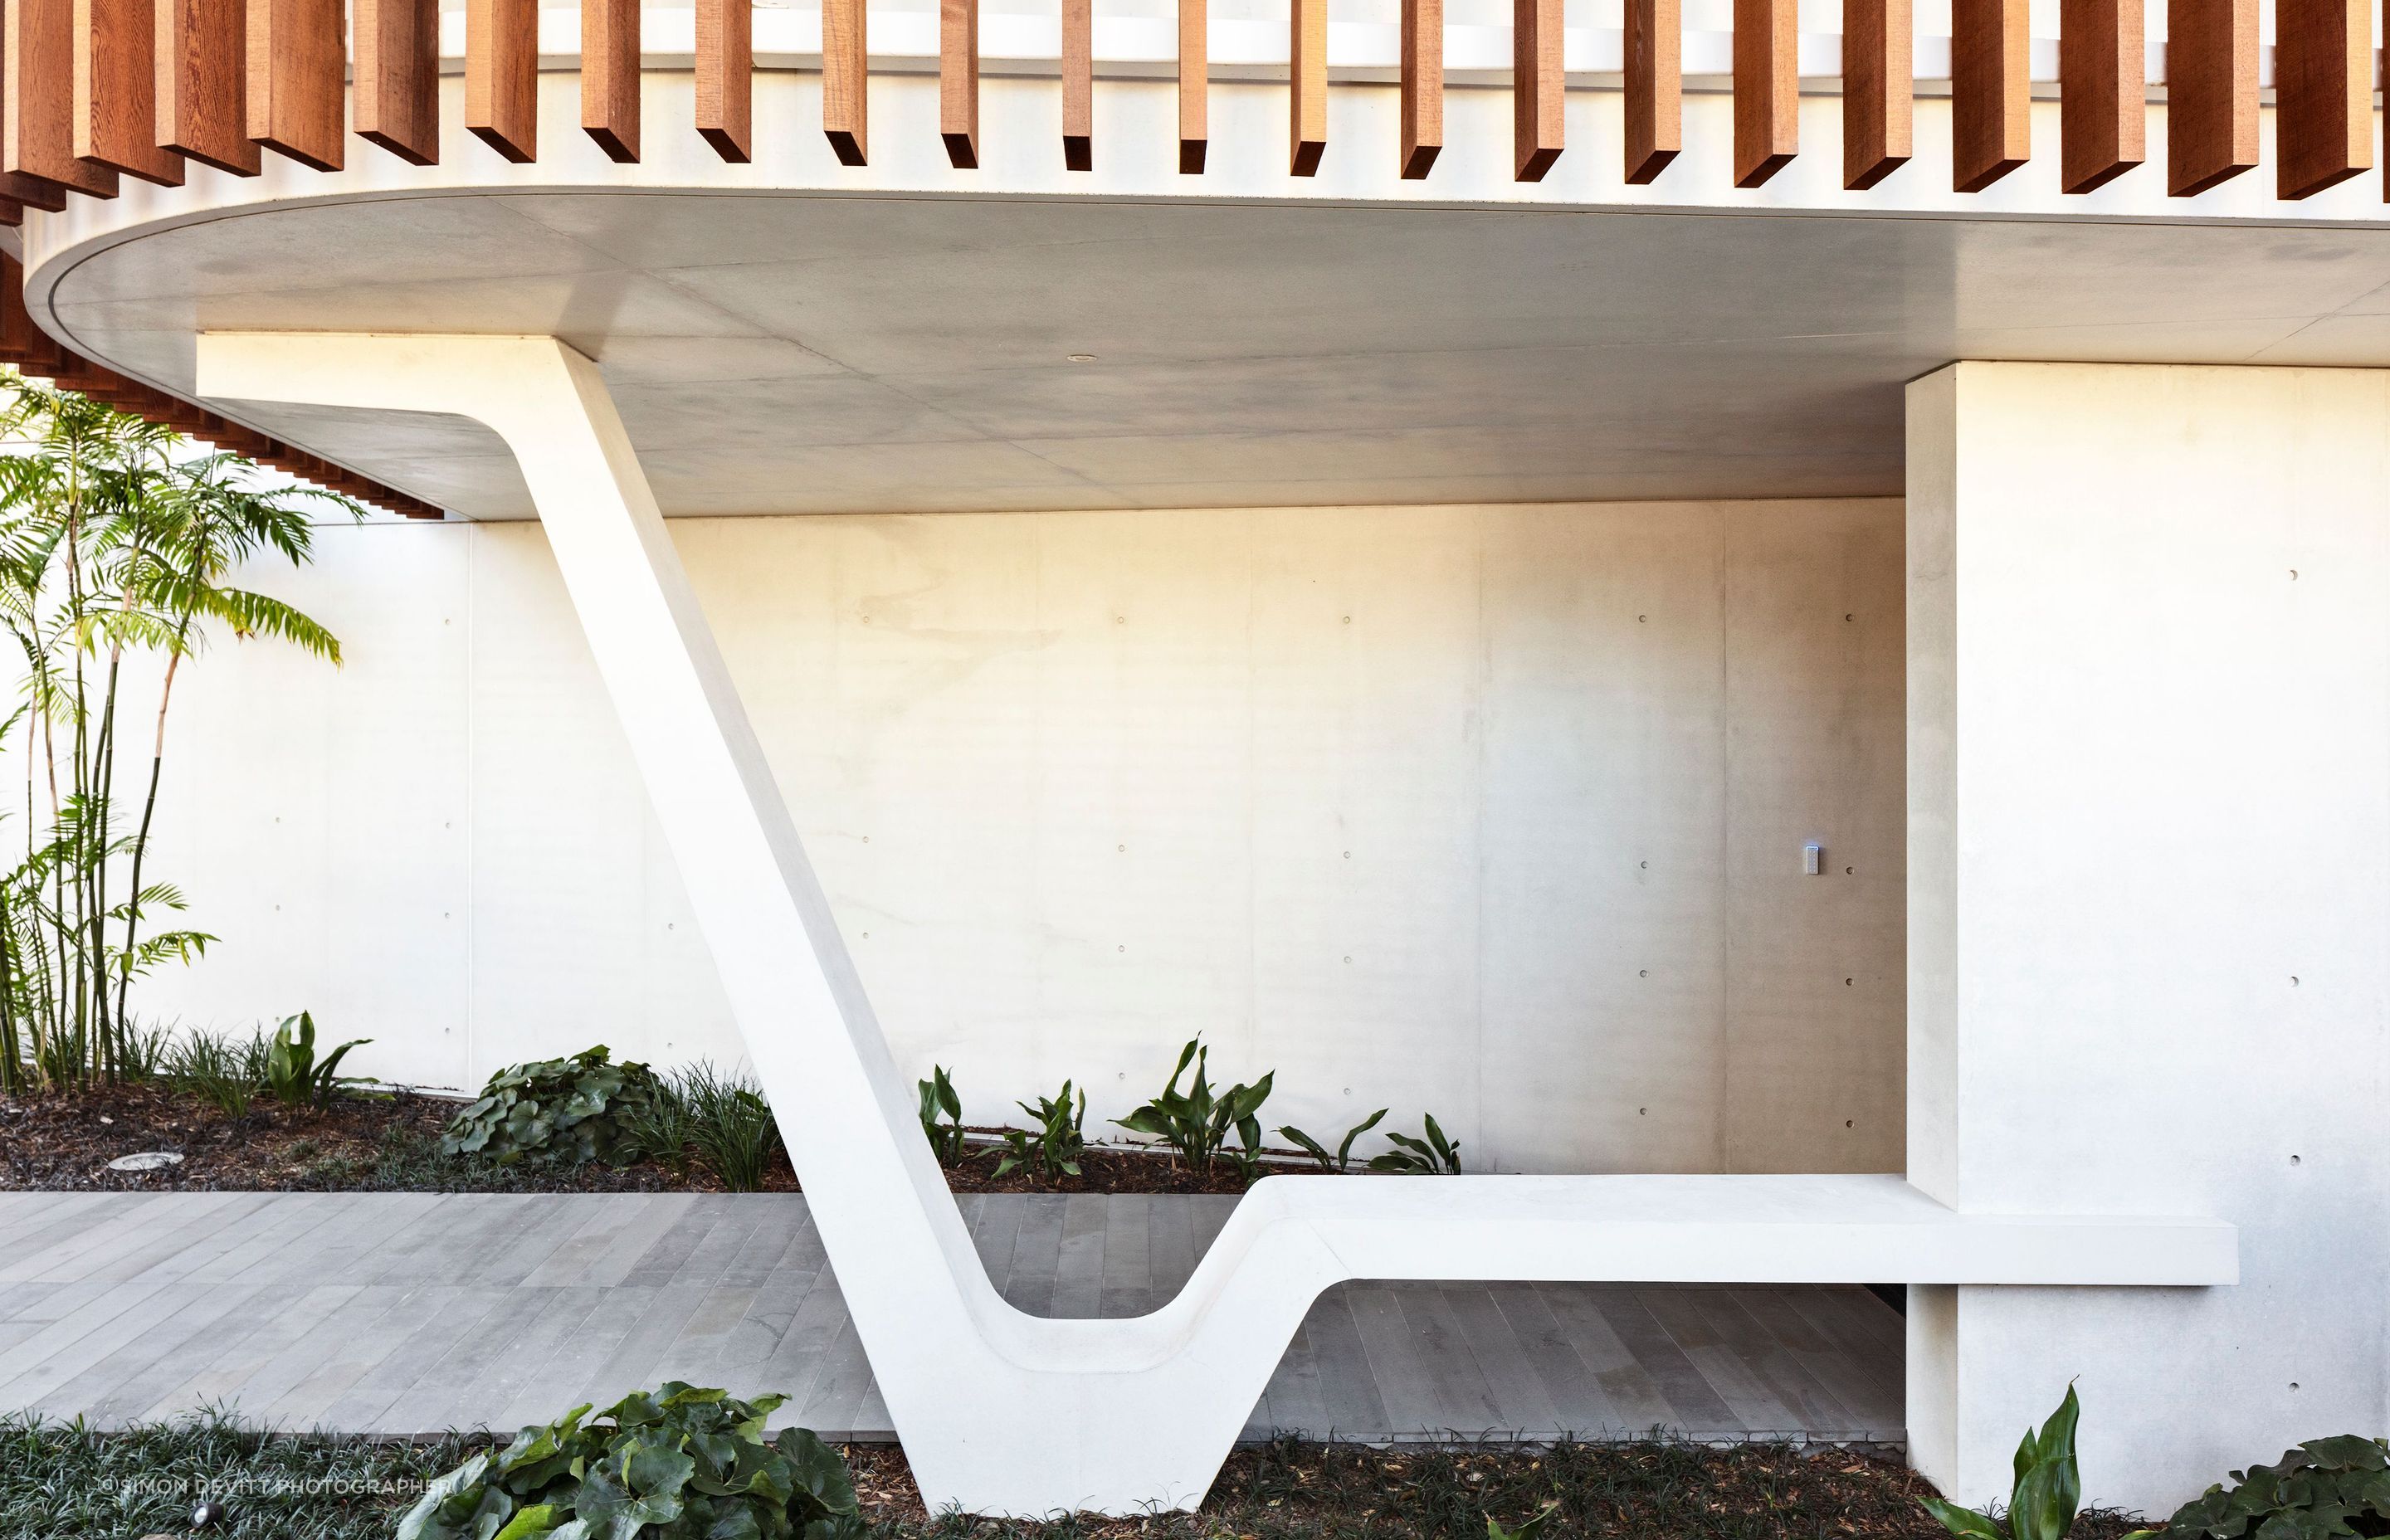 A striking sculptural element in white concrete provides a perfectly serene spot to sit and take off your shoes at the entrance of Clifftops house.